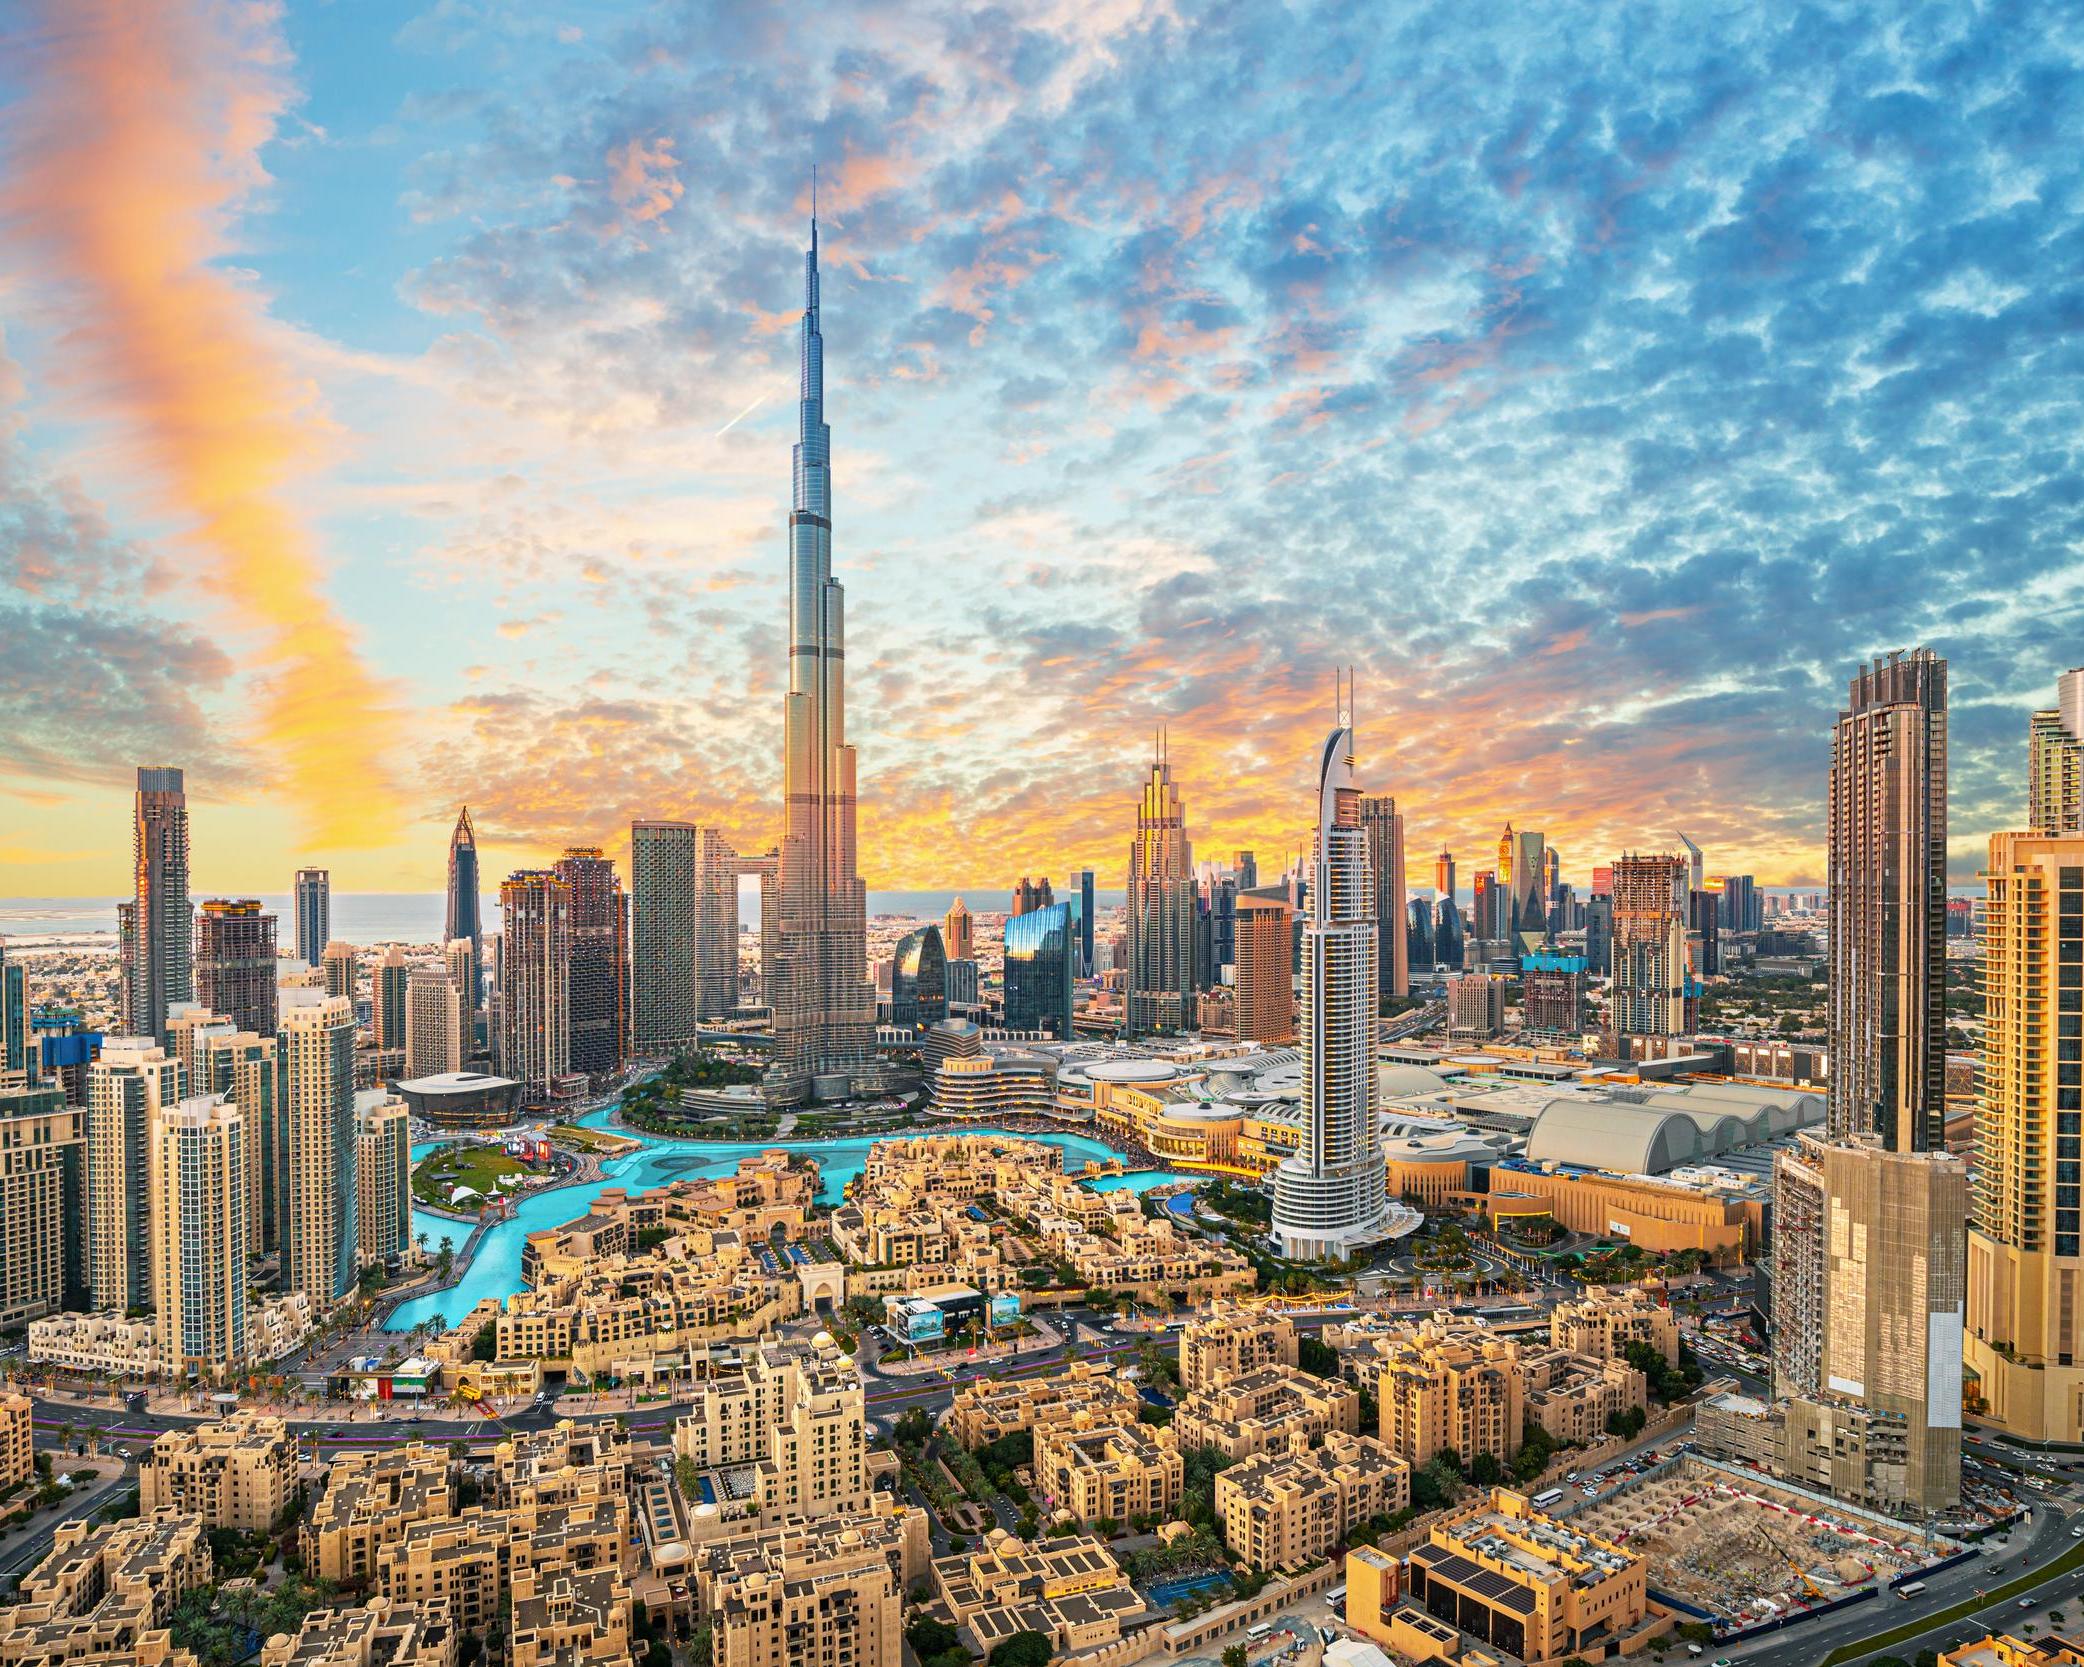 8 Days in Dubai LUX with WizzAir